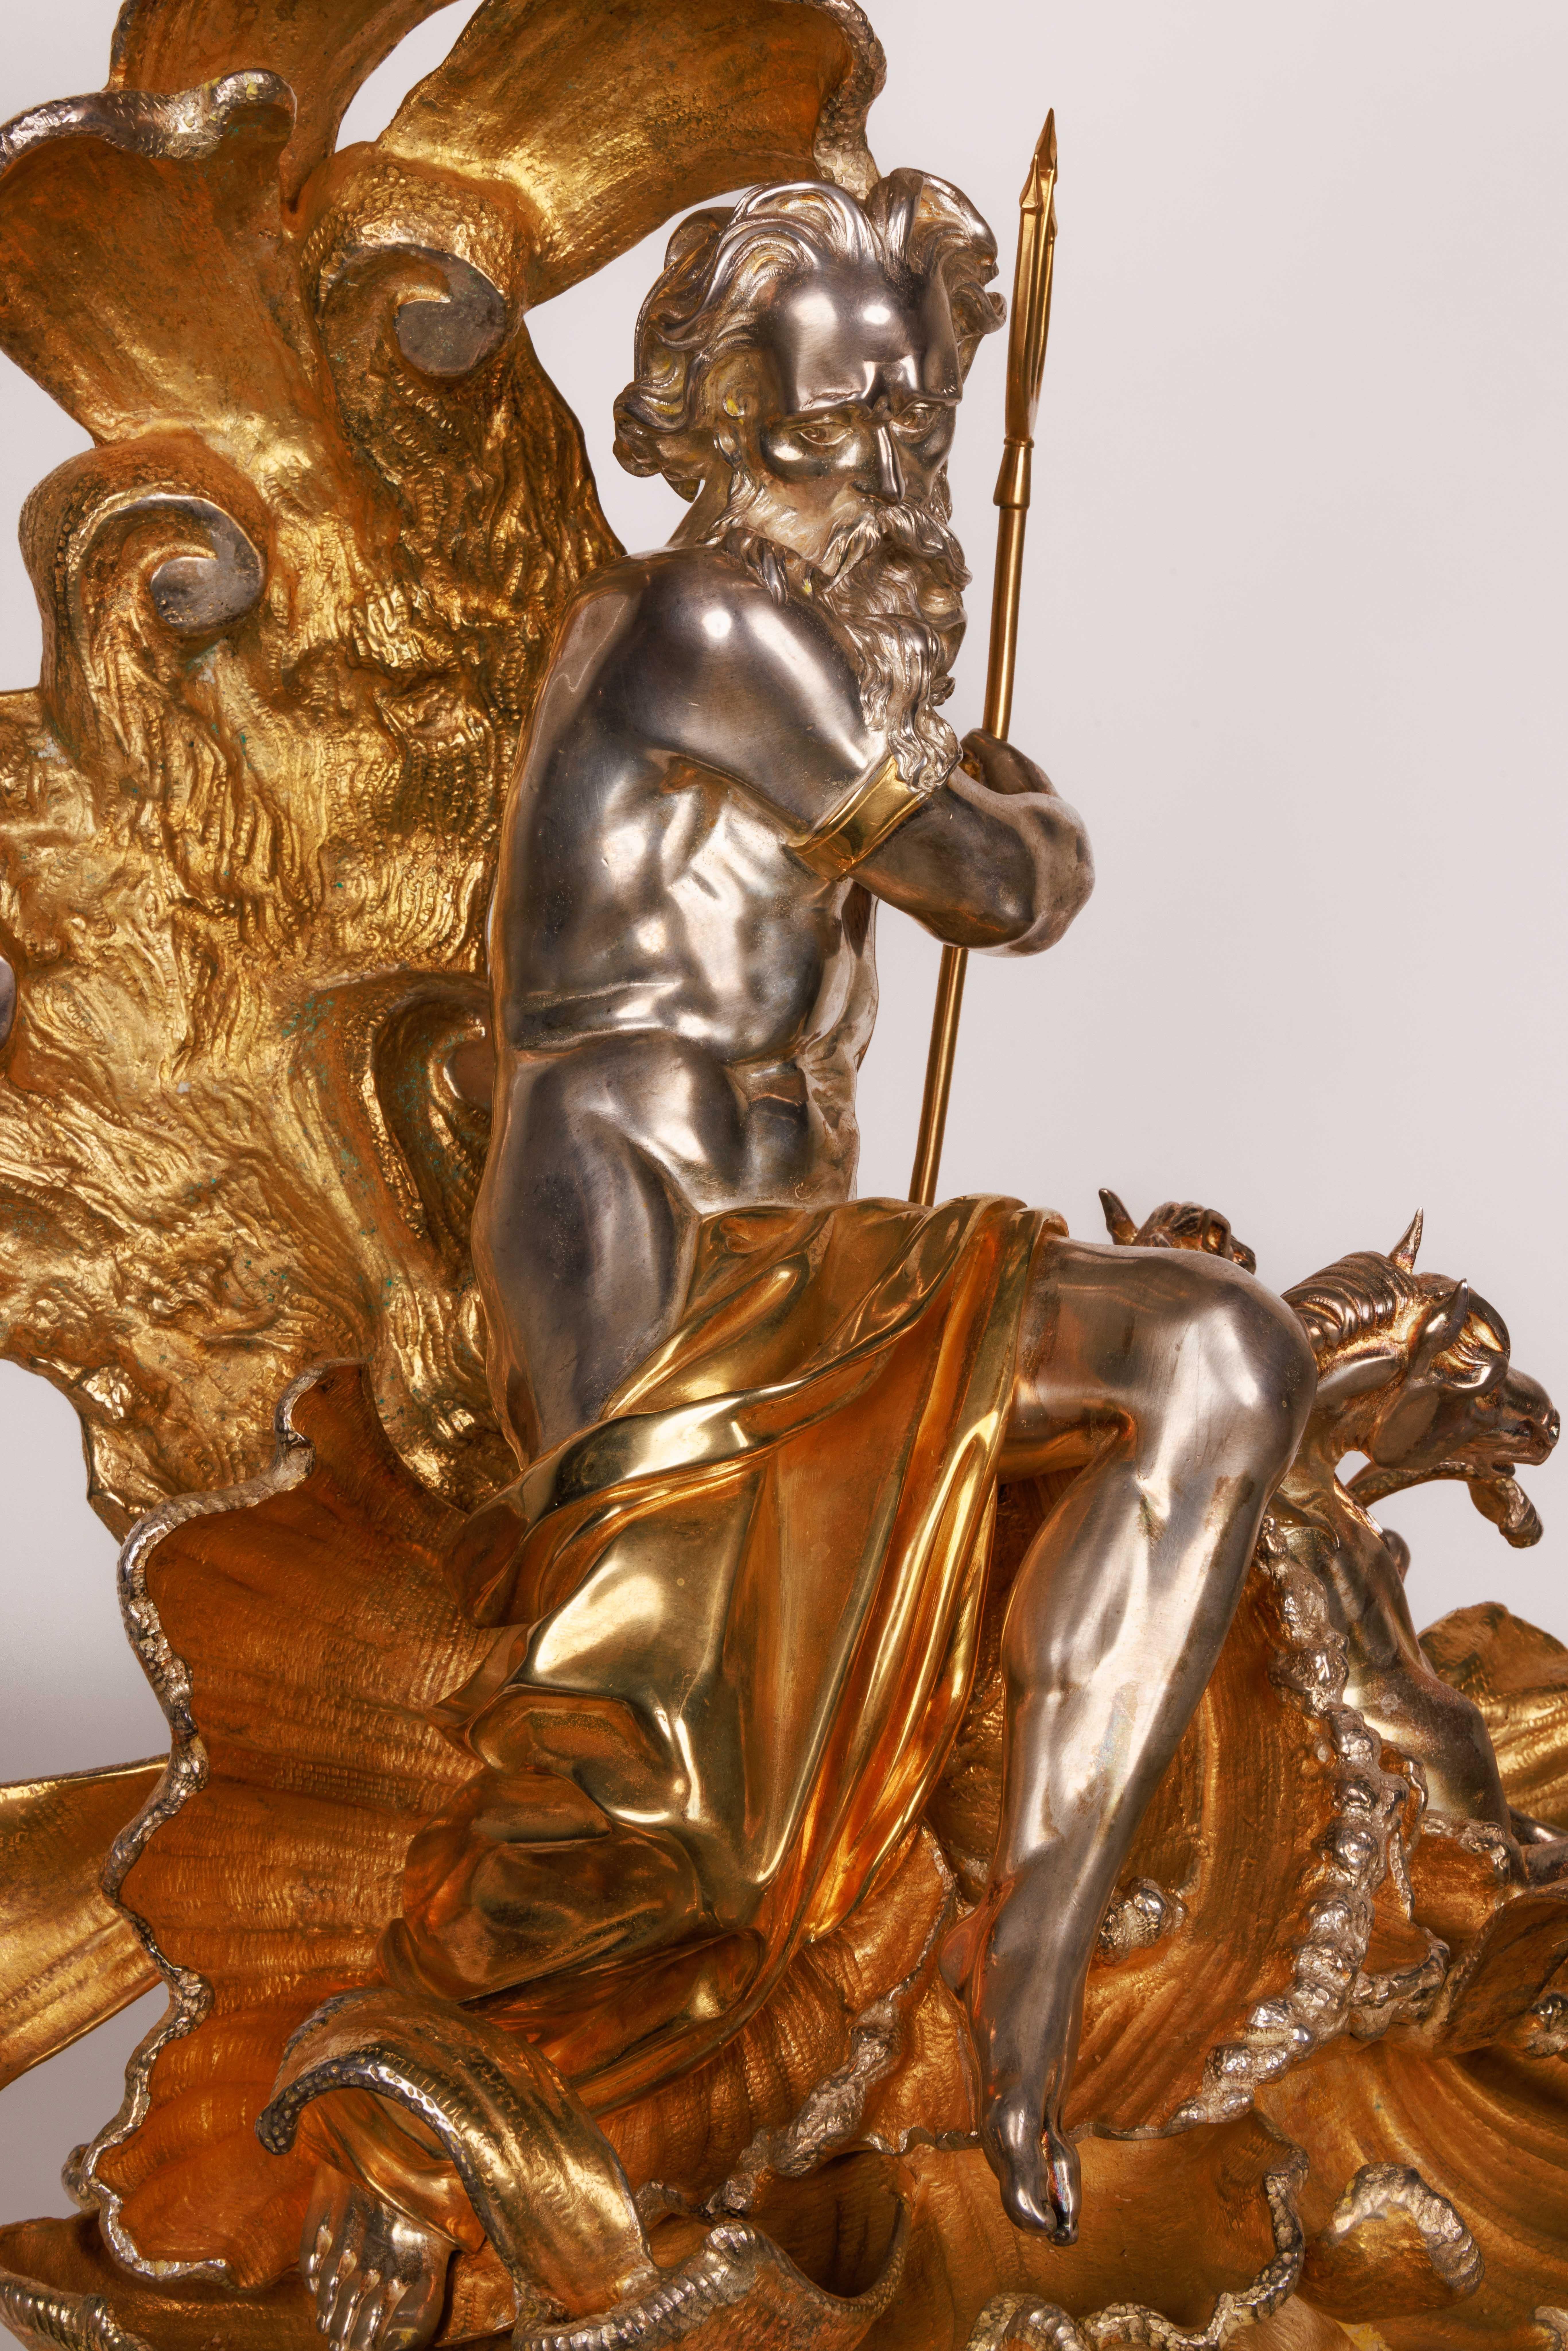 Monumental Silvered and Gilt-Bronze Glass Centerpiece of 